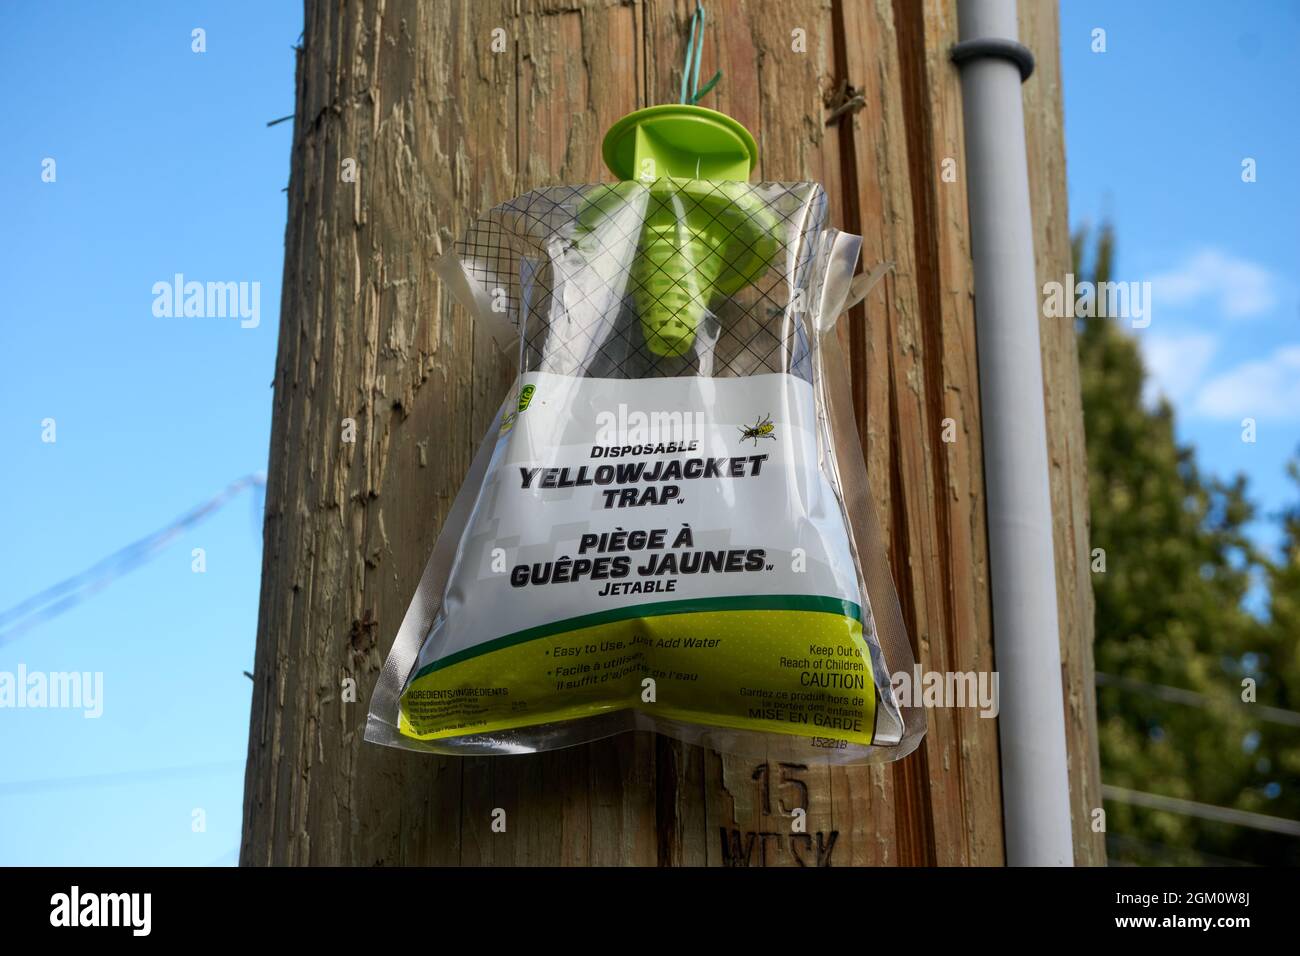 Disposable yellowjacket trap hanging from a utility pole in Vancouver, British Columbia, Canada Stock Photo